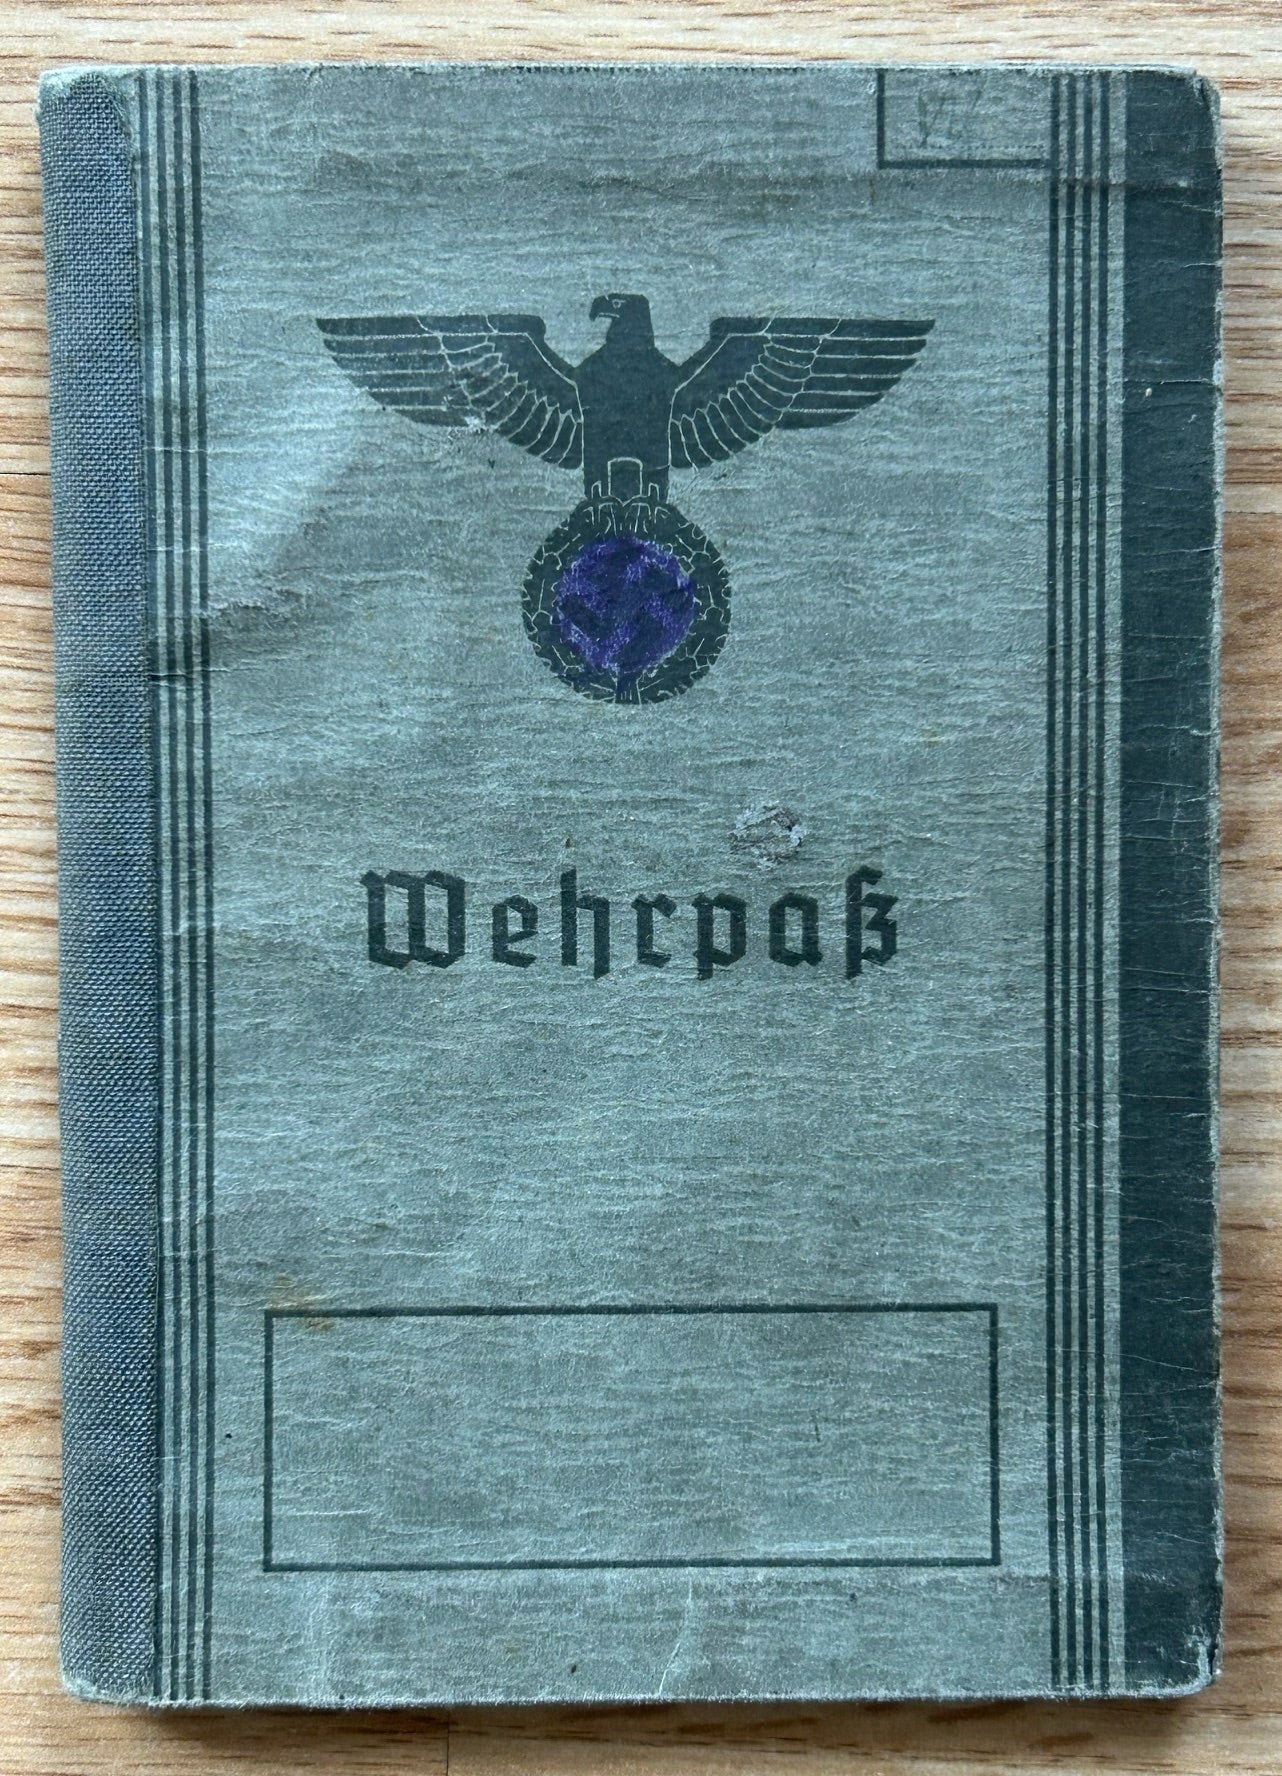 Wehrpass - Ruhr area resident